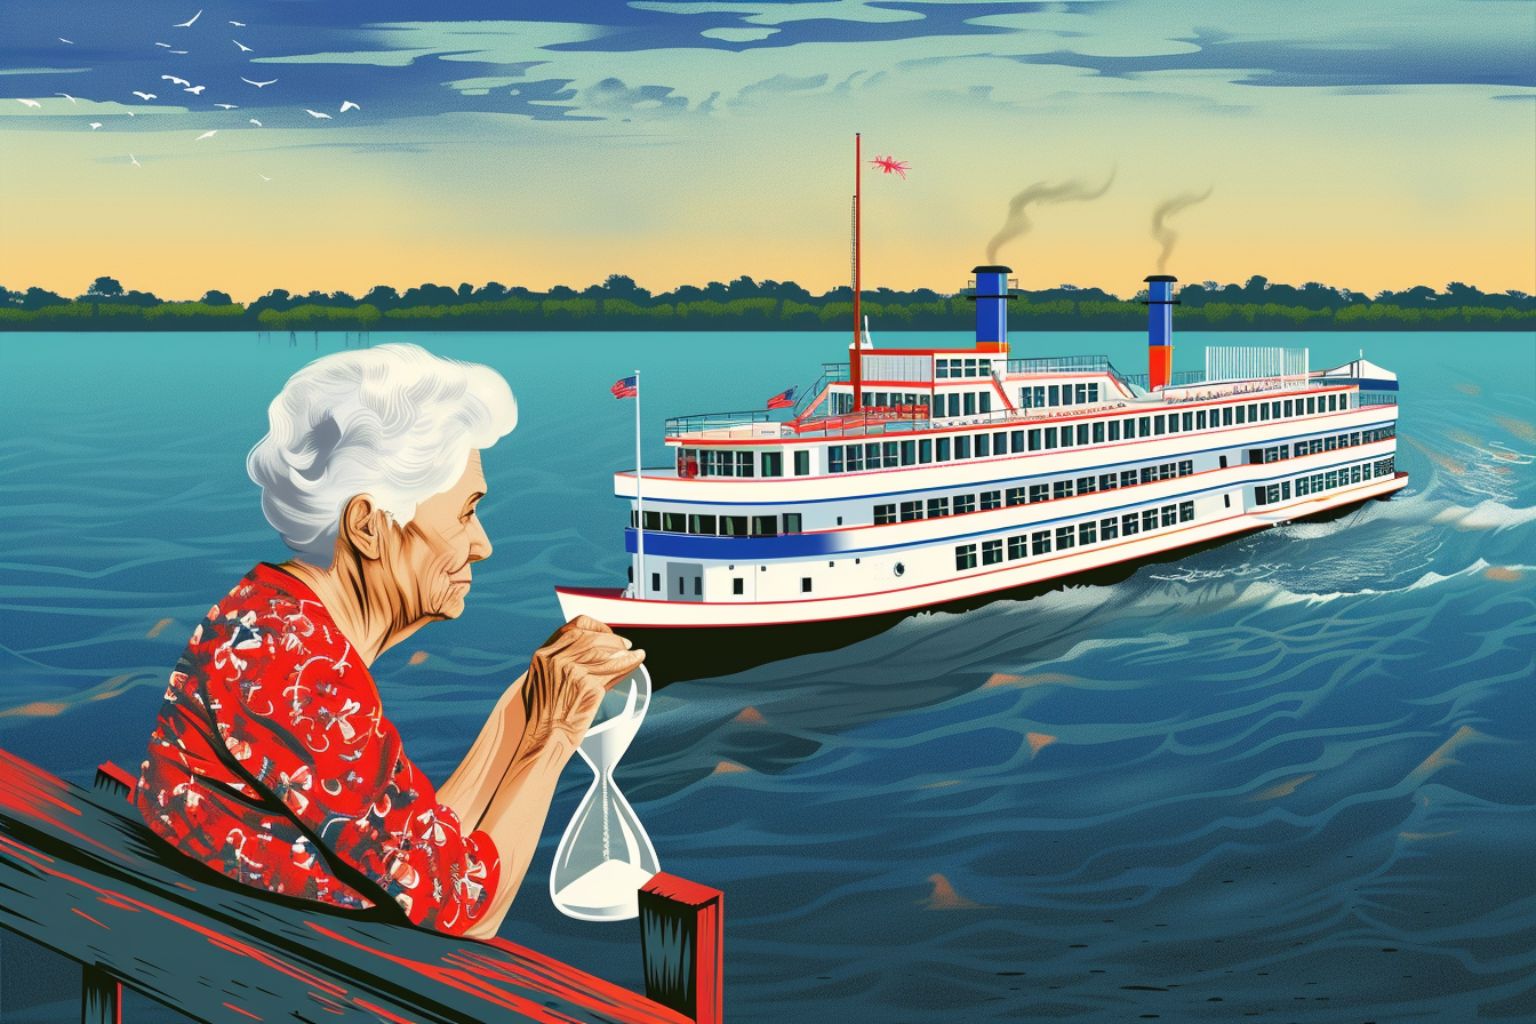 Carolyn Hoke's anticipation for a serene seven-night river cruise from St. Louis to Minneapolis with American Queen Voyages turned into a prolonged ordeal of frustration and uncertainty. After the unexpected cancellation of her cruise in November 2022, Carolyn found herself ensnared in a seemingly endless wait for a refund of $10,126. Despite her persistent efforts, including calls to the company, escalations to the accounting department, and complaints to the Florida Division of Consumer Service, the refund remained elusive. As she navigated the maze of customer service apologies and bureaucratic dead ends, the ominous shadow of the company's potential bankruptcy loomed large, threatening to engulf her hopes of reclaiming her hard-earned money. This tale of perseverance against the tides of corporate negligence unfolds as Carolyn, with the help of consumer advocacy, confronts the daunting challenge of securing her refund from the brink of a collapsing cruise line.